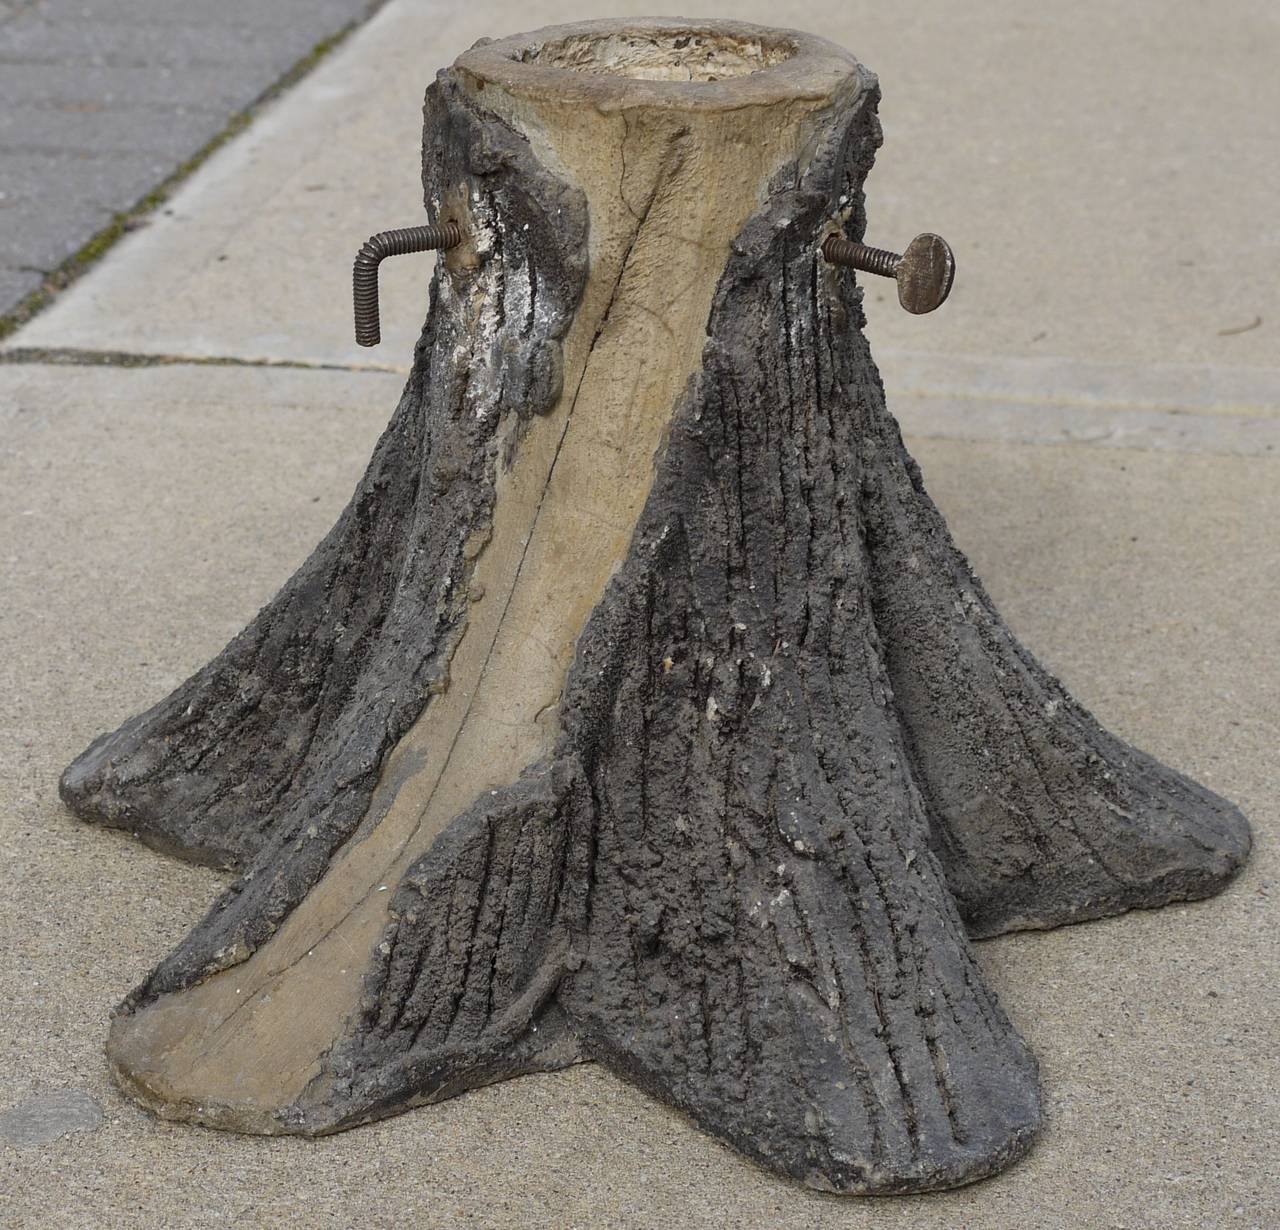 Vintage sculpted concrete faux bois Christmas tree stand probably from the 1940s. Great patina and so whimsical.